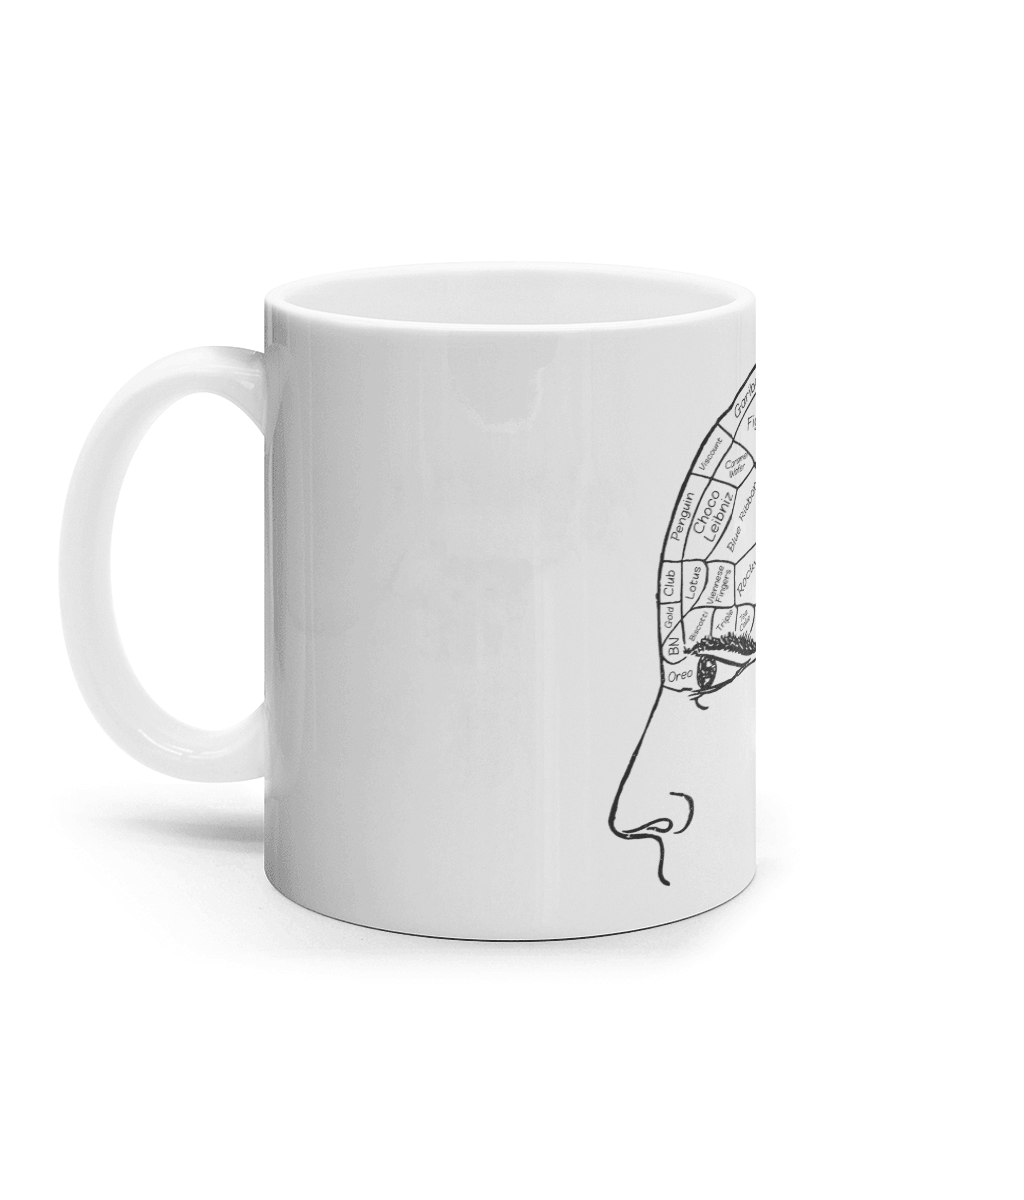 Favourite Biscuit Brain Gift Mug. Thinking of biscuits? - DuvetDay.co.uk